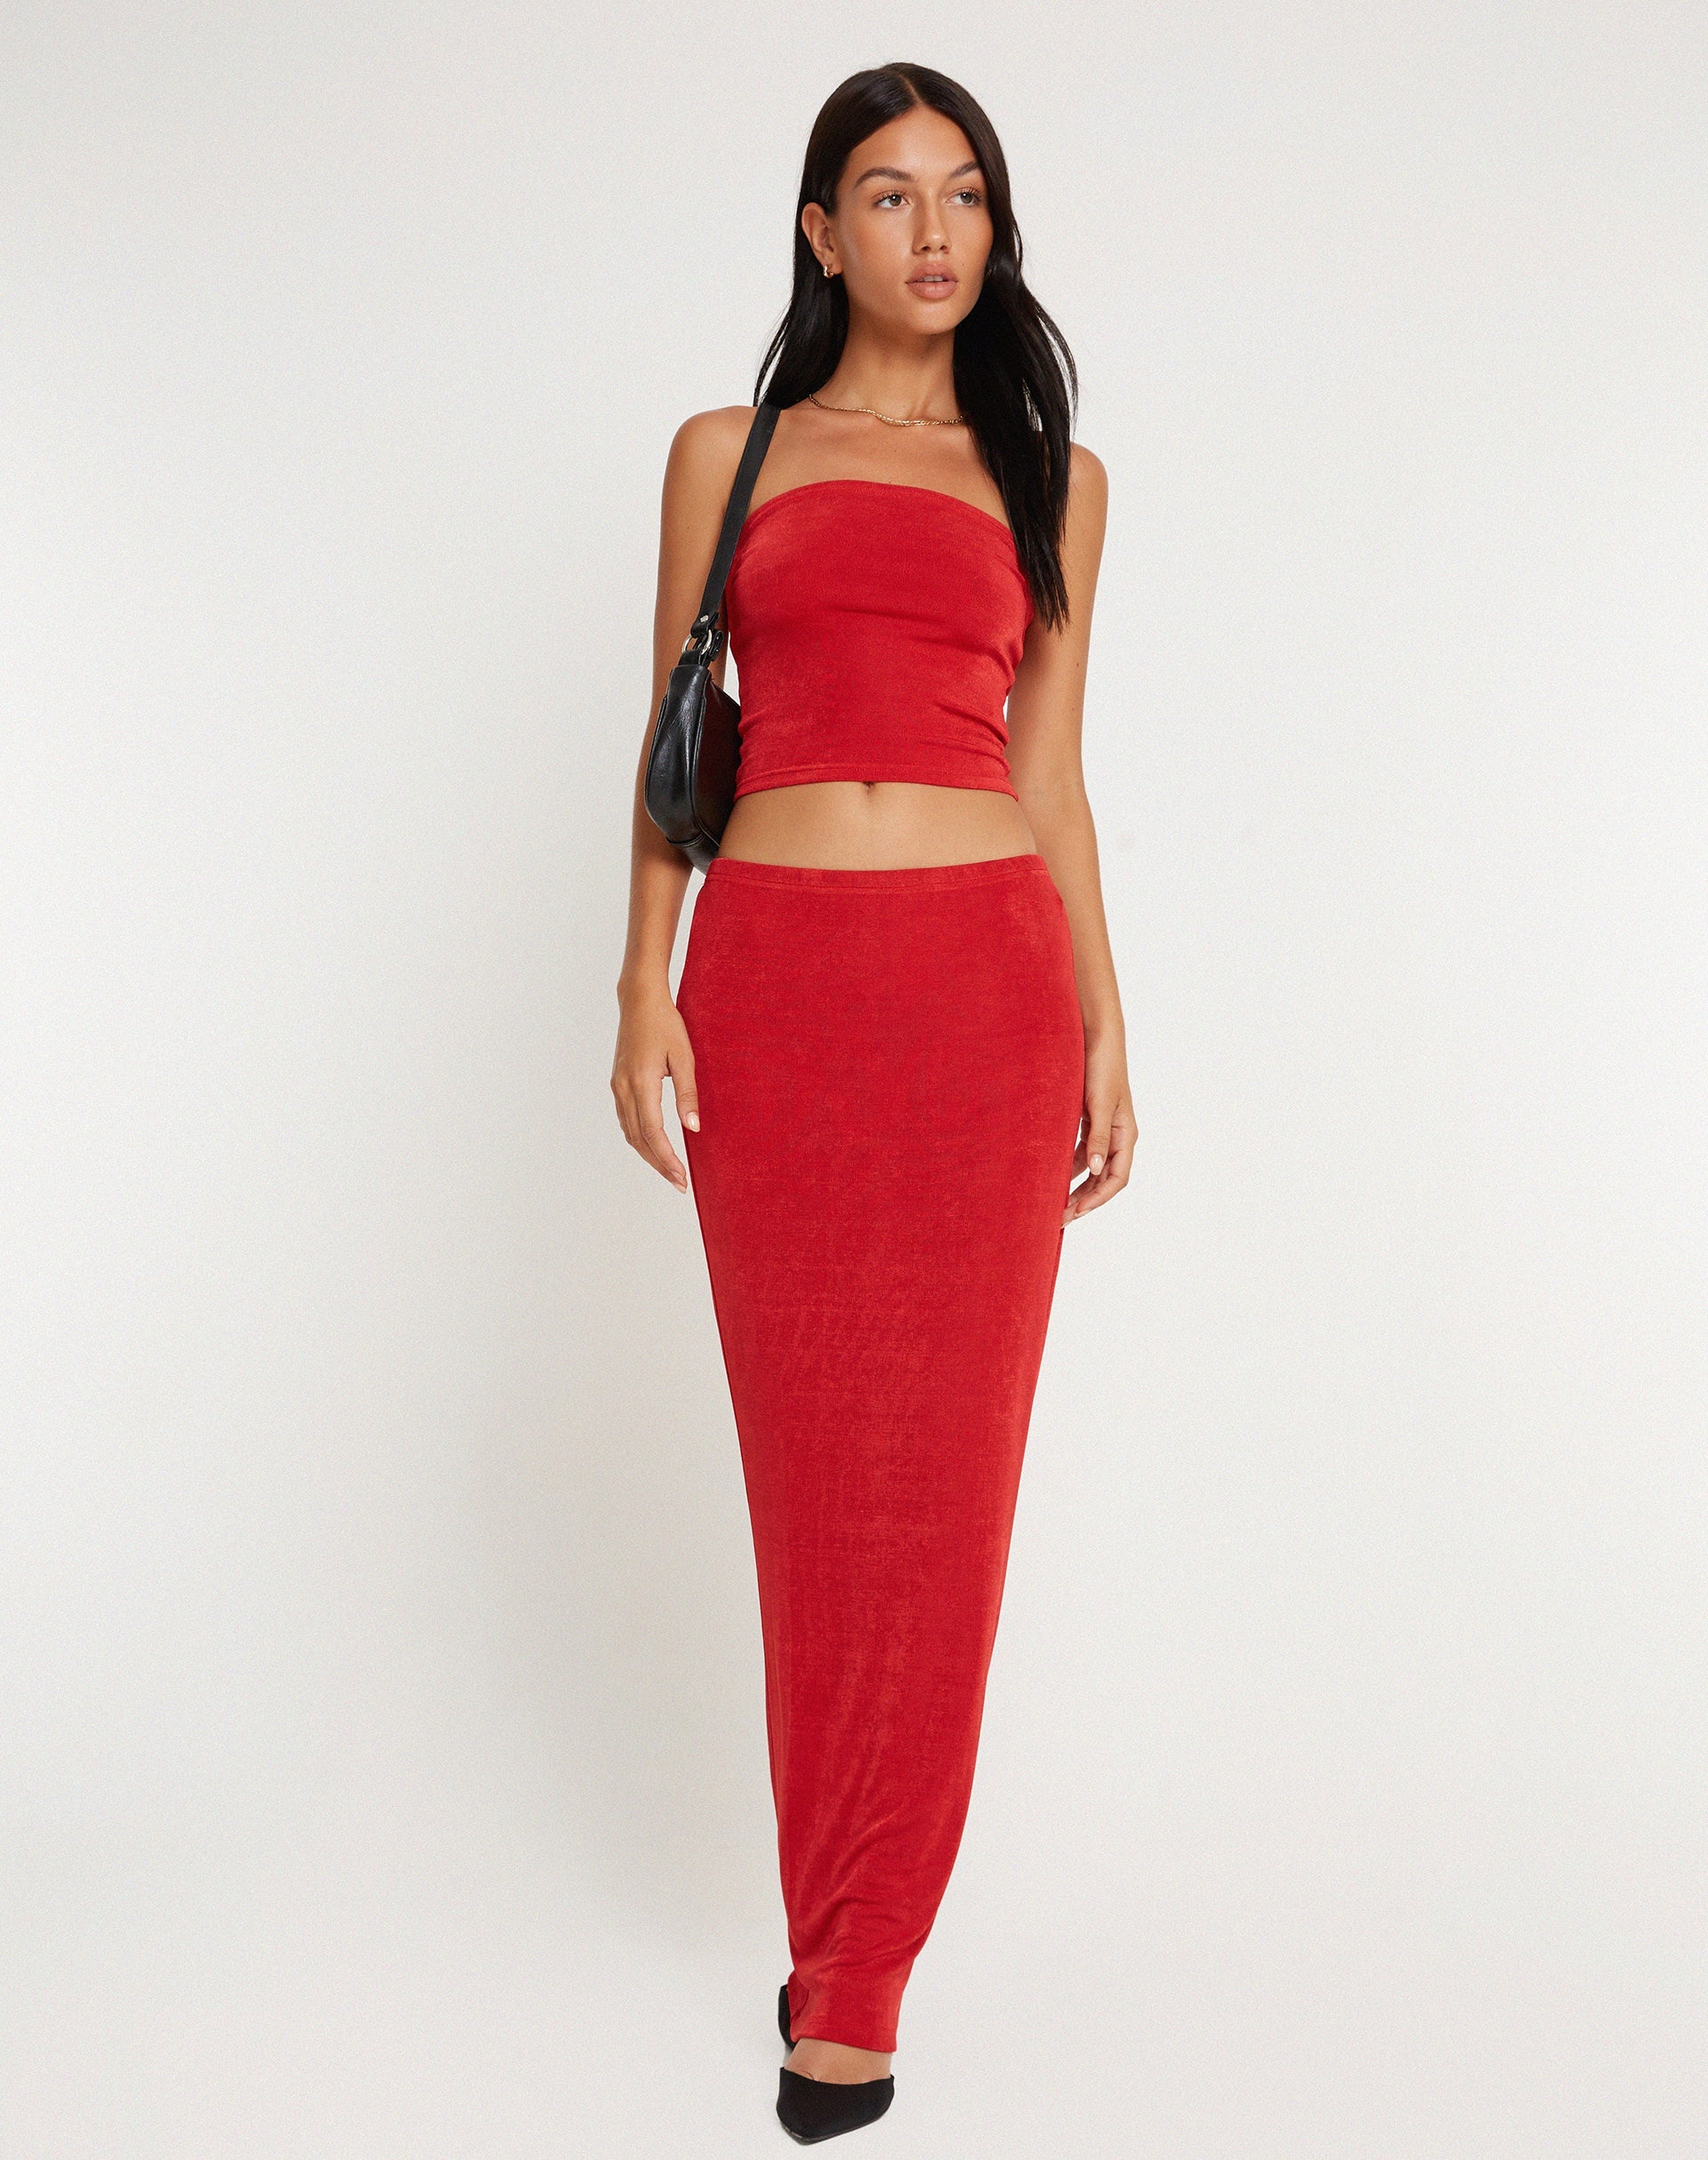 image of Tulus Maxi Skirt Red